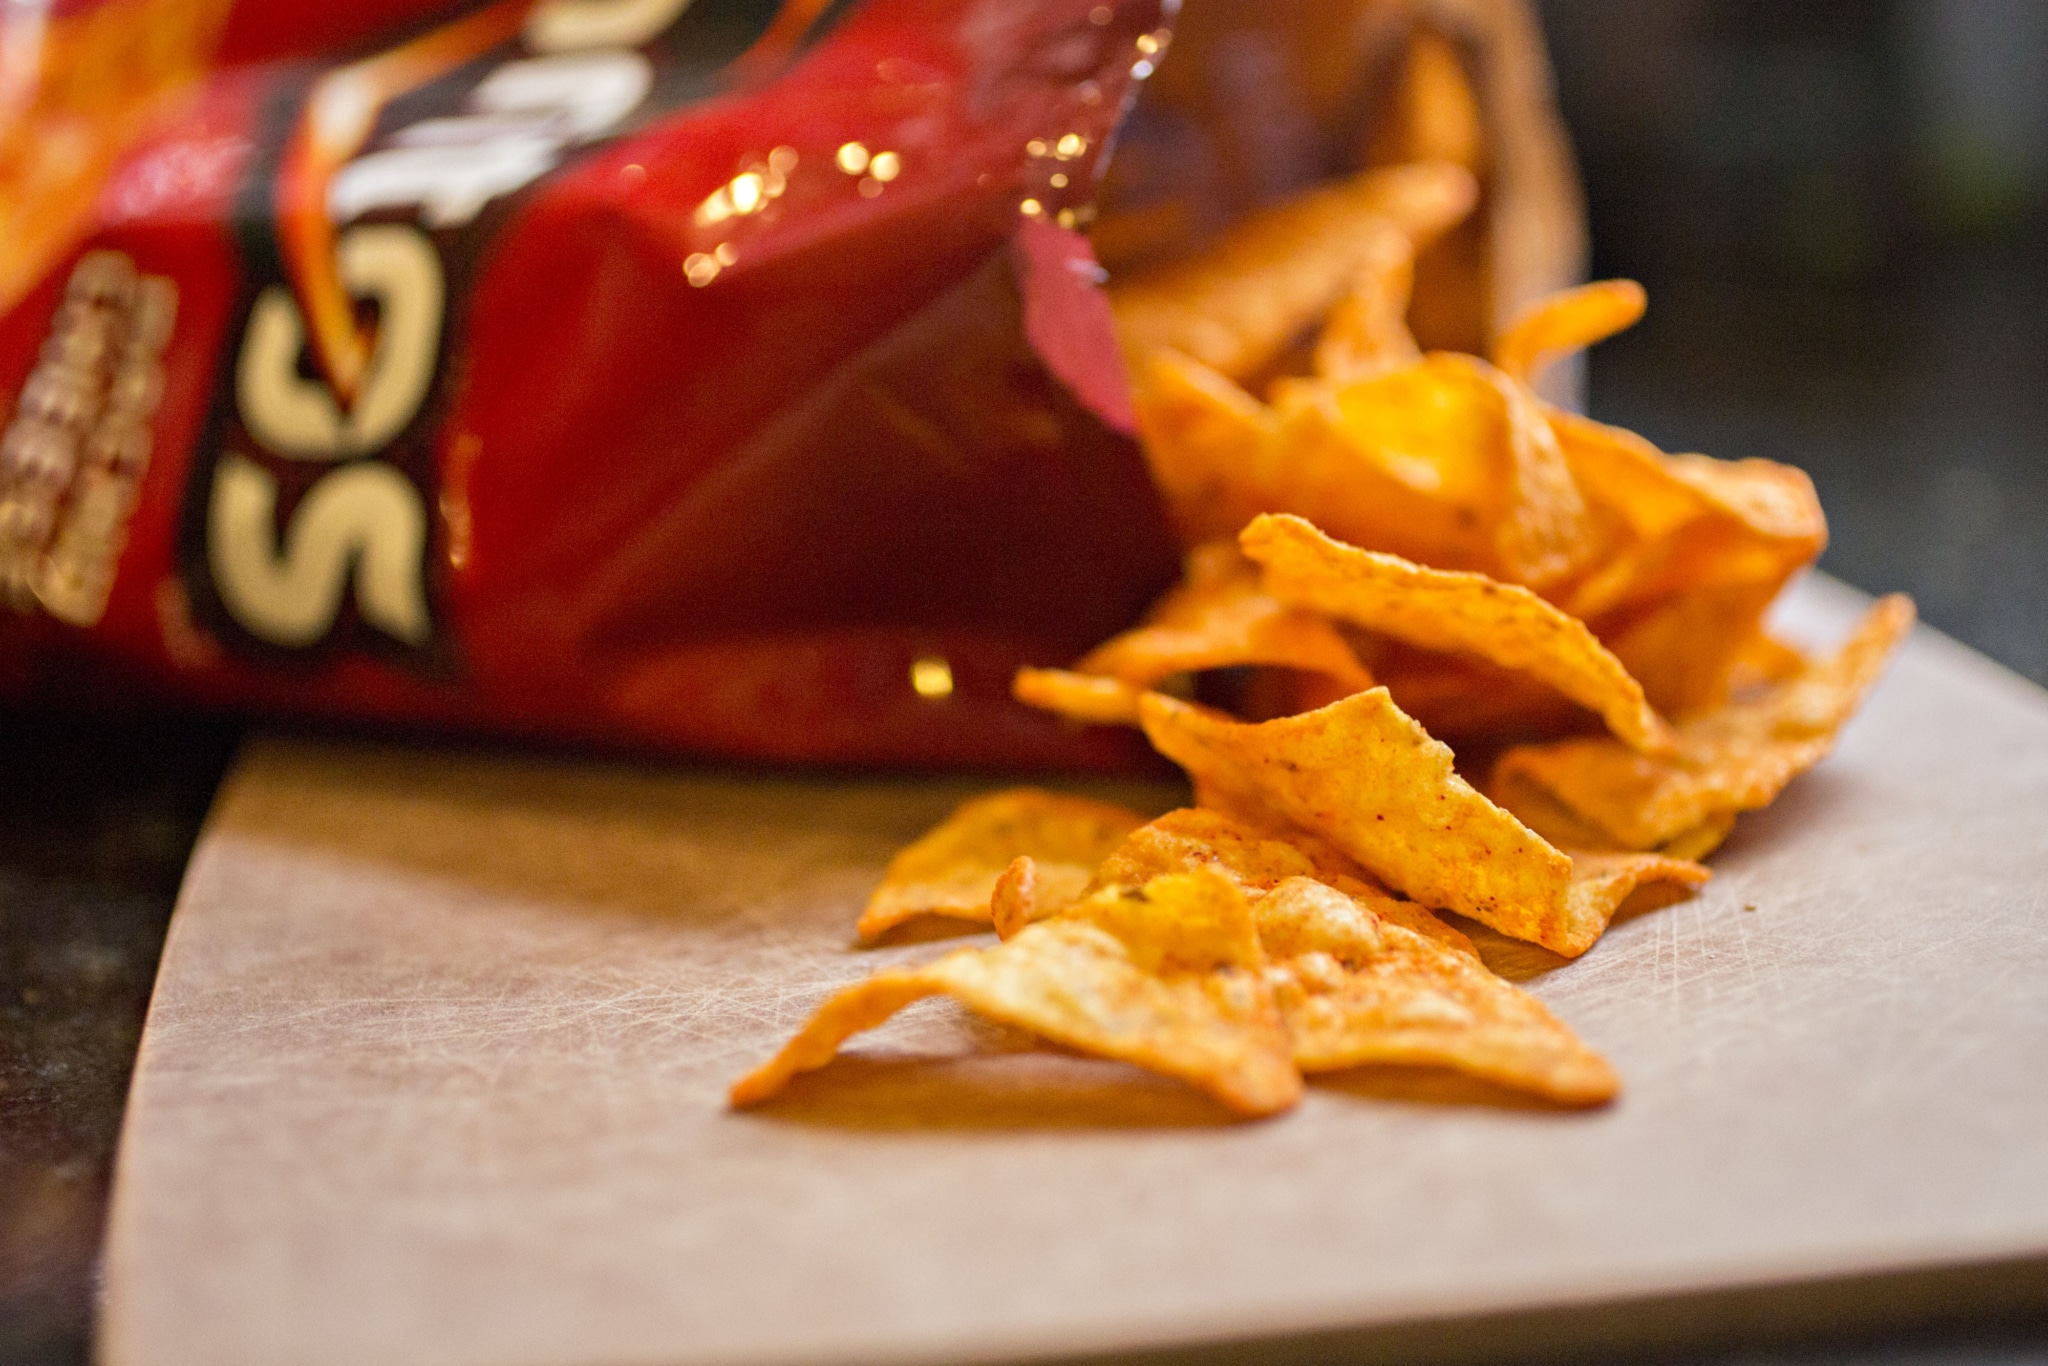 Are Doritos Bad for You? What You Should Know - Chef Julia